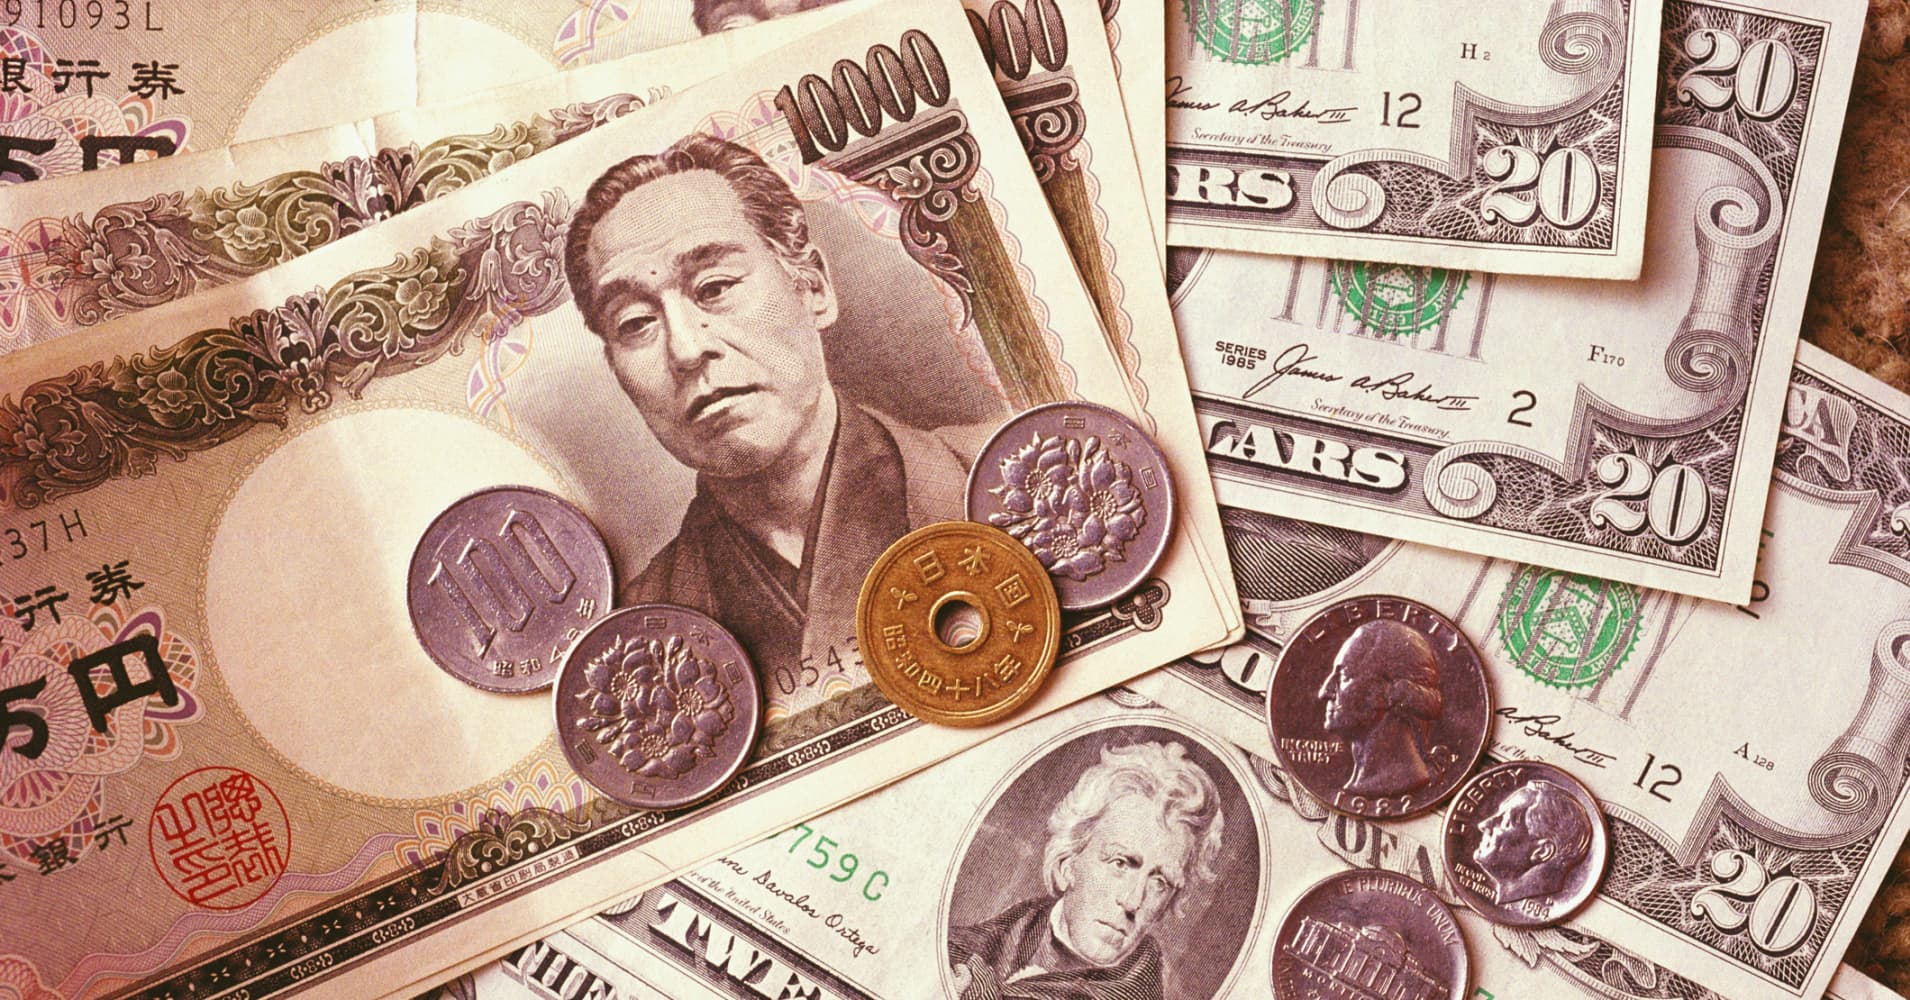 japan's yen had a roller coaster week amid suspected intervention. here's what you need to know